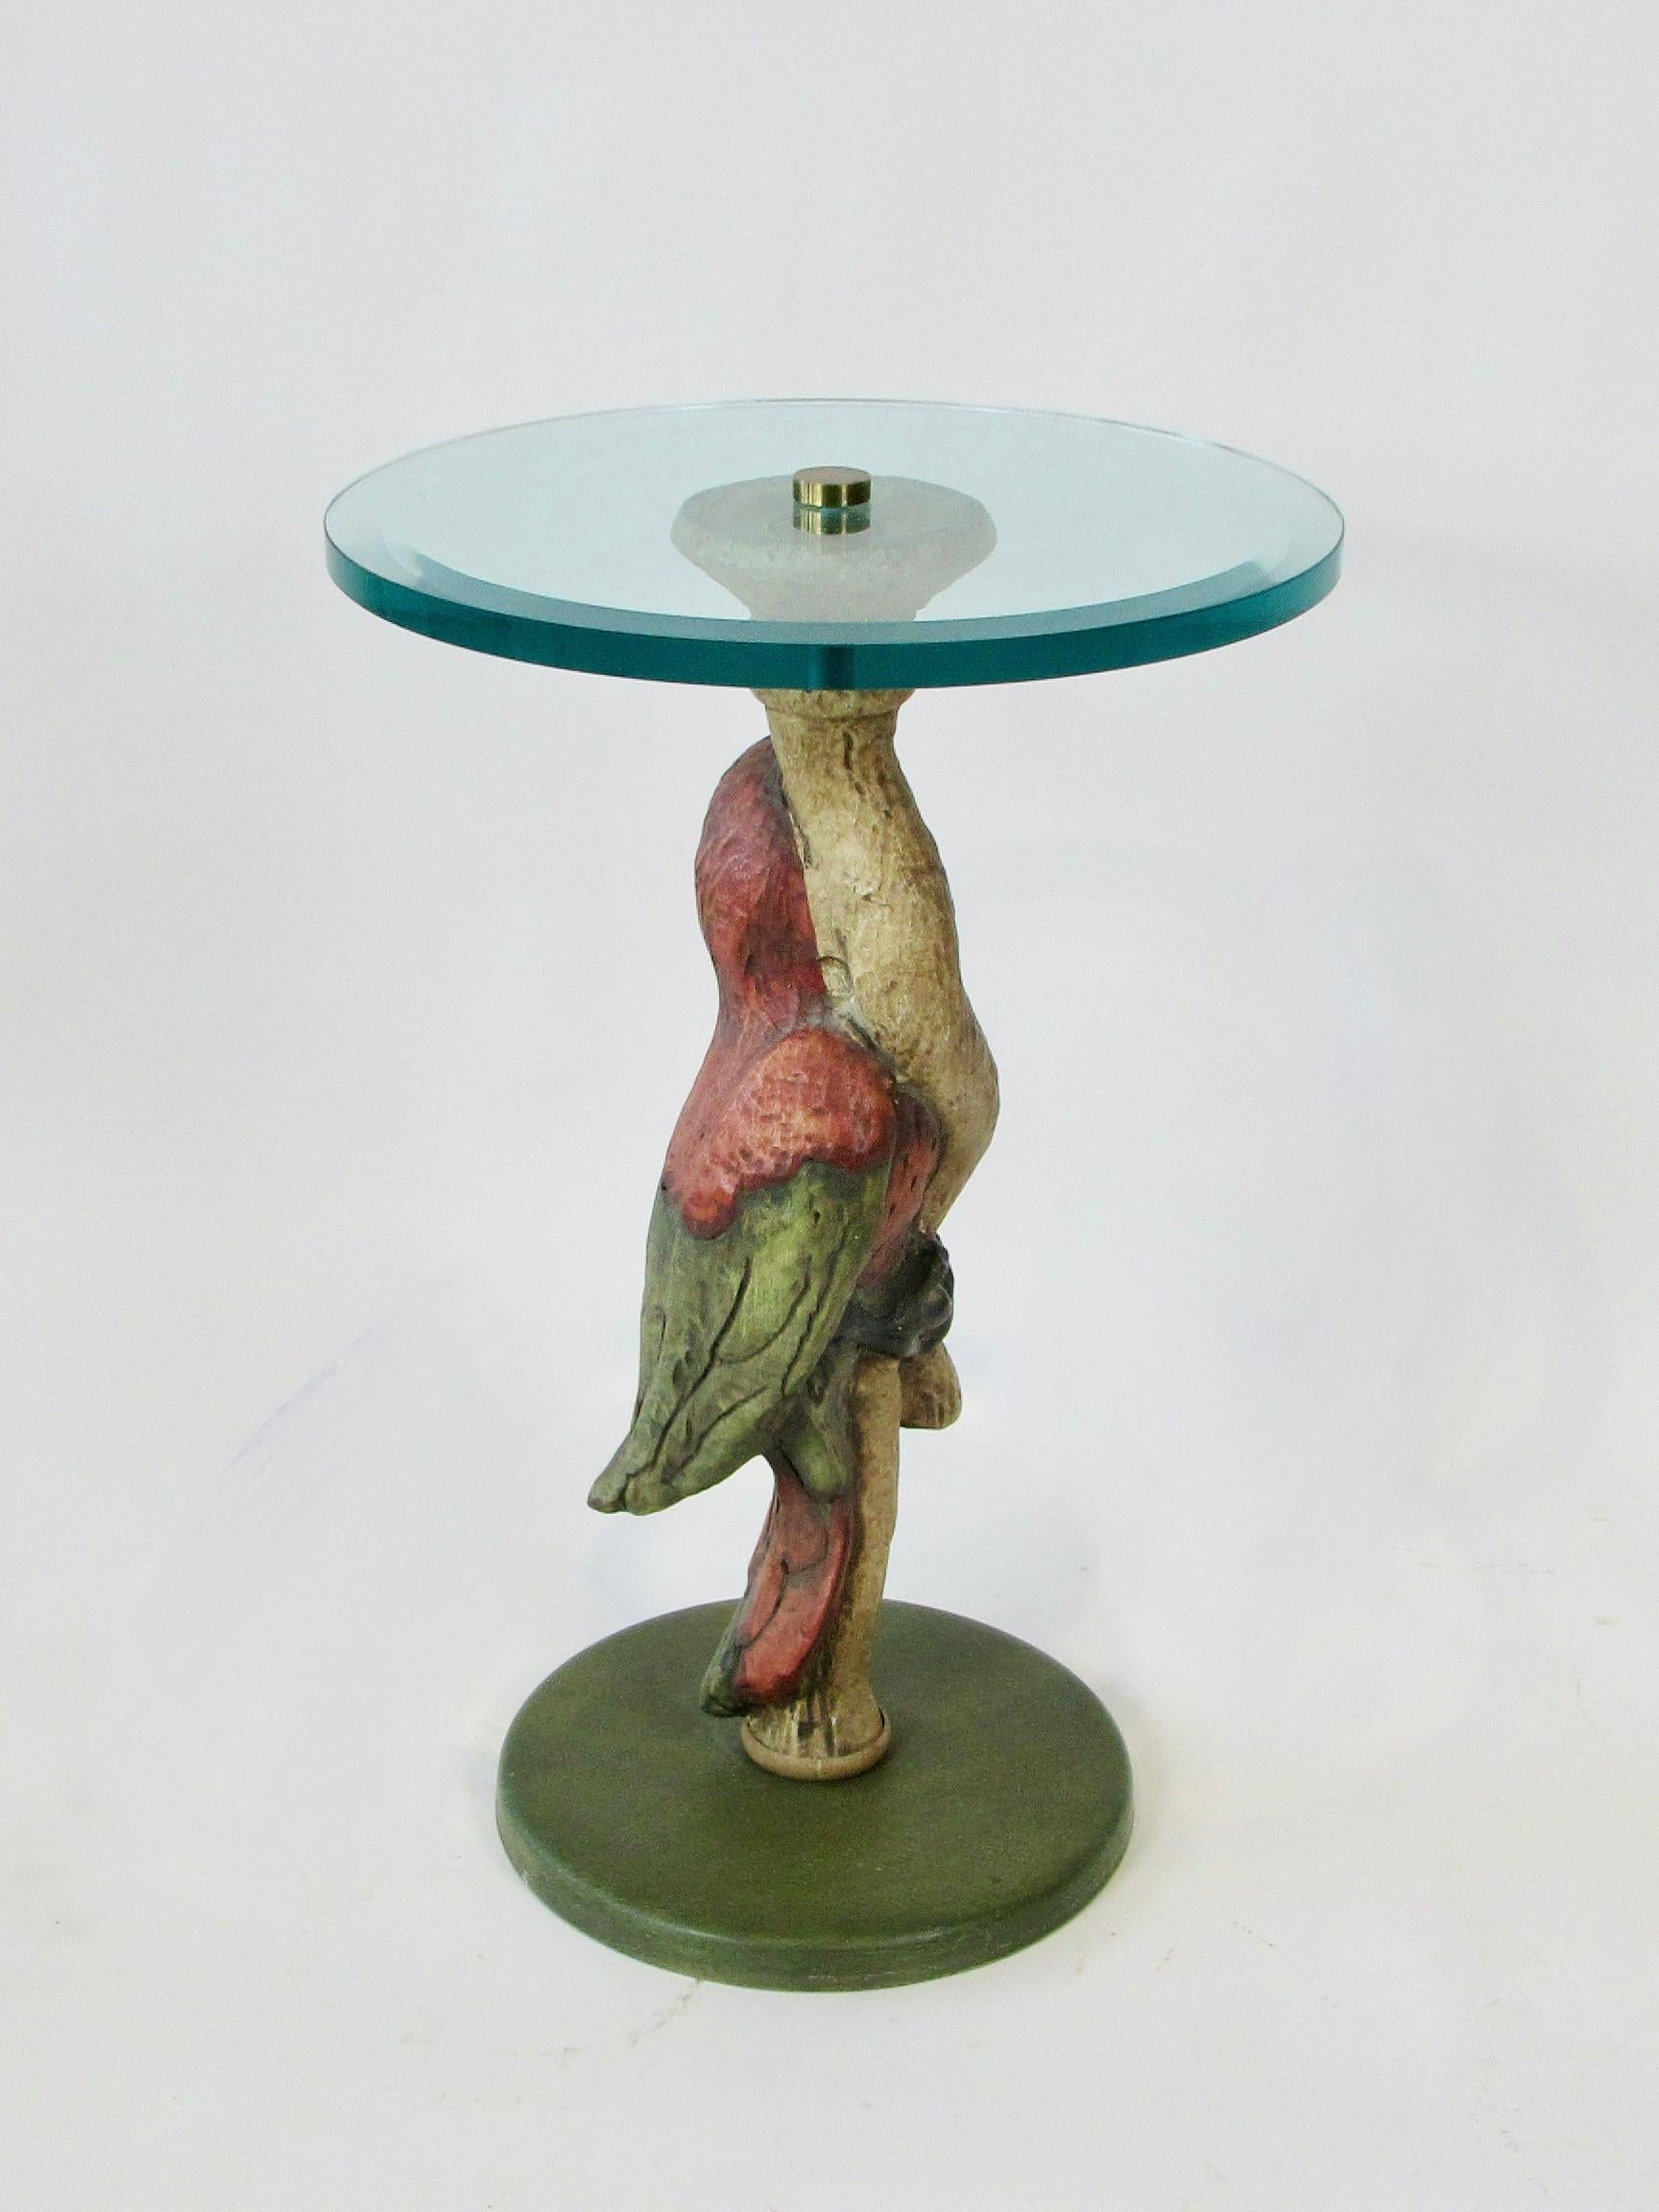 Whimsical Polly Want a Table Bevel Glass on Parrot Base Style of Maitland Smith For Sale 1